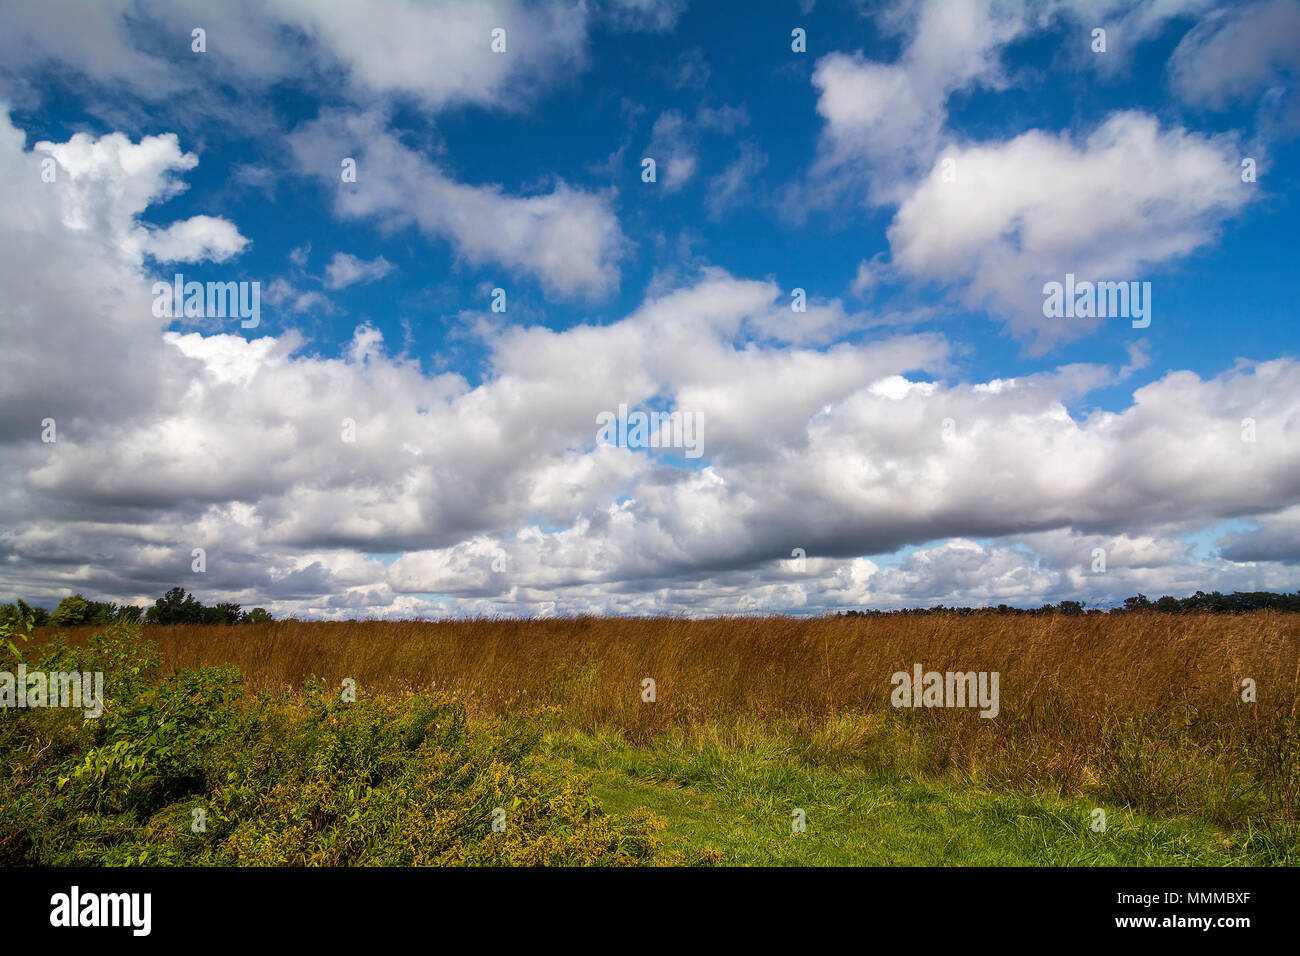 Beautiful fall day with blooming Goldenrod and a beautiful blue sky with cumulus clouds. Taken at Blue Creek Conservation area in Northwest Ohio. Stock Photo